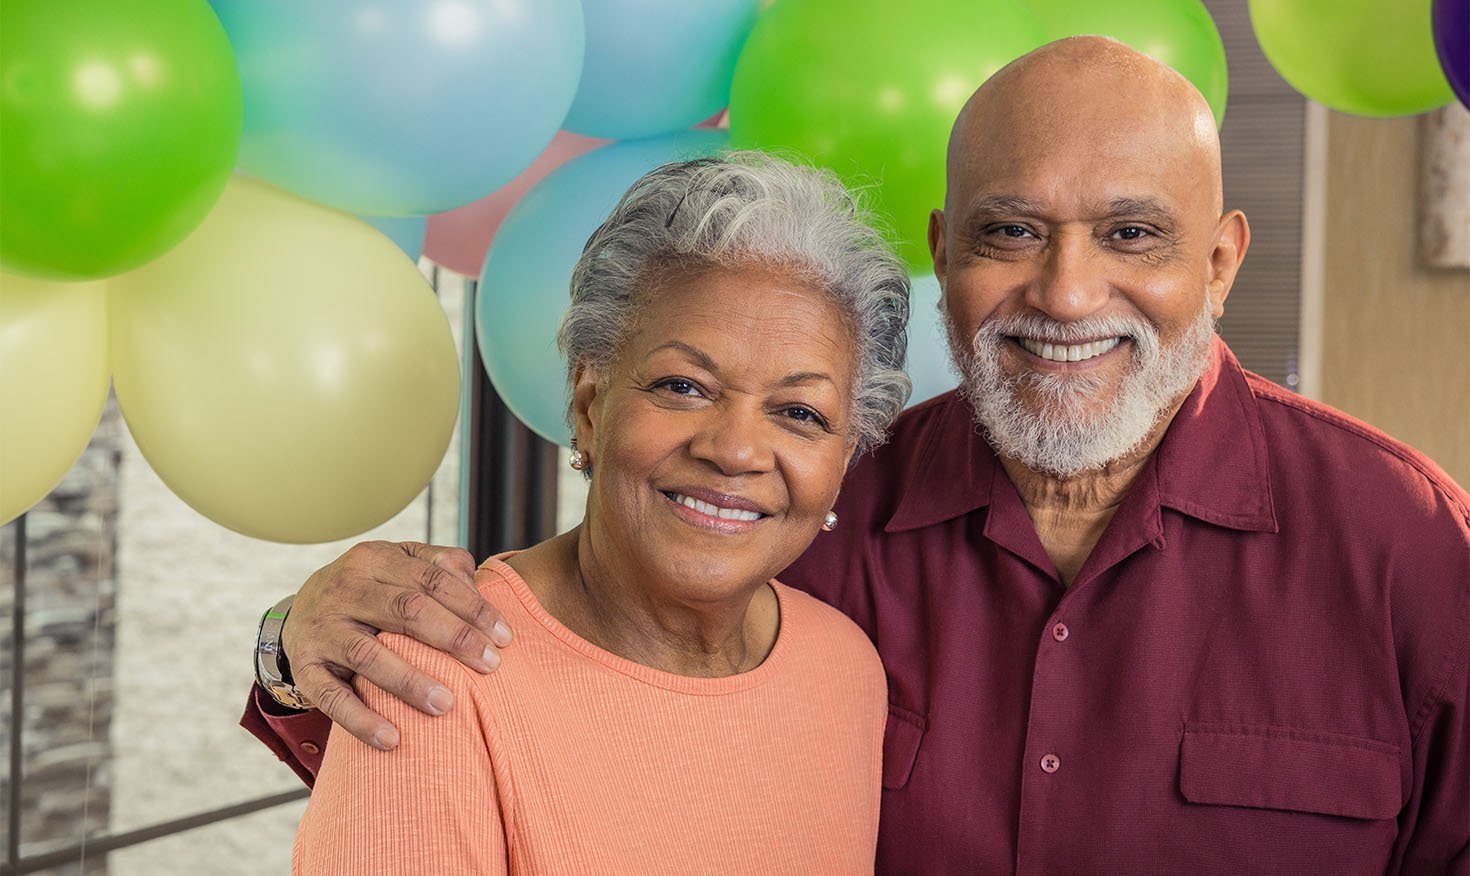 Smiling senior couple in front of balloons